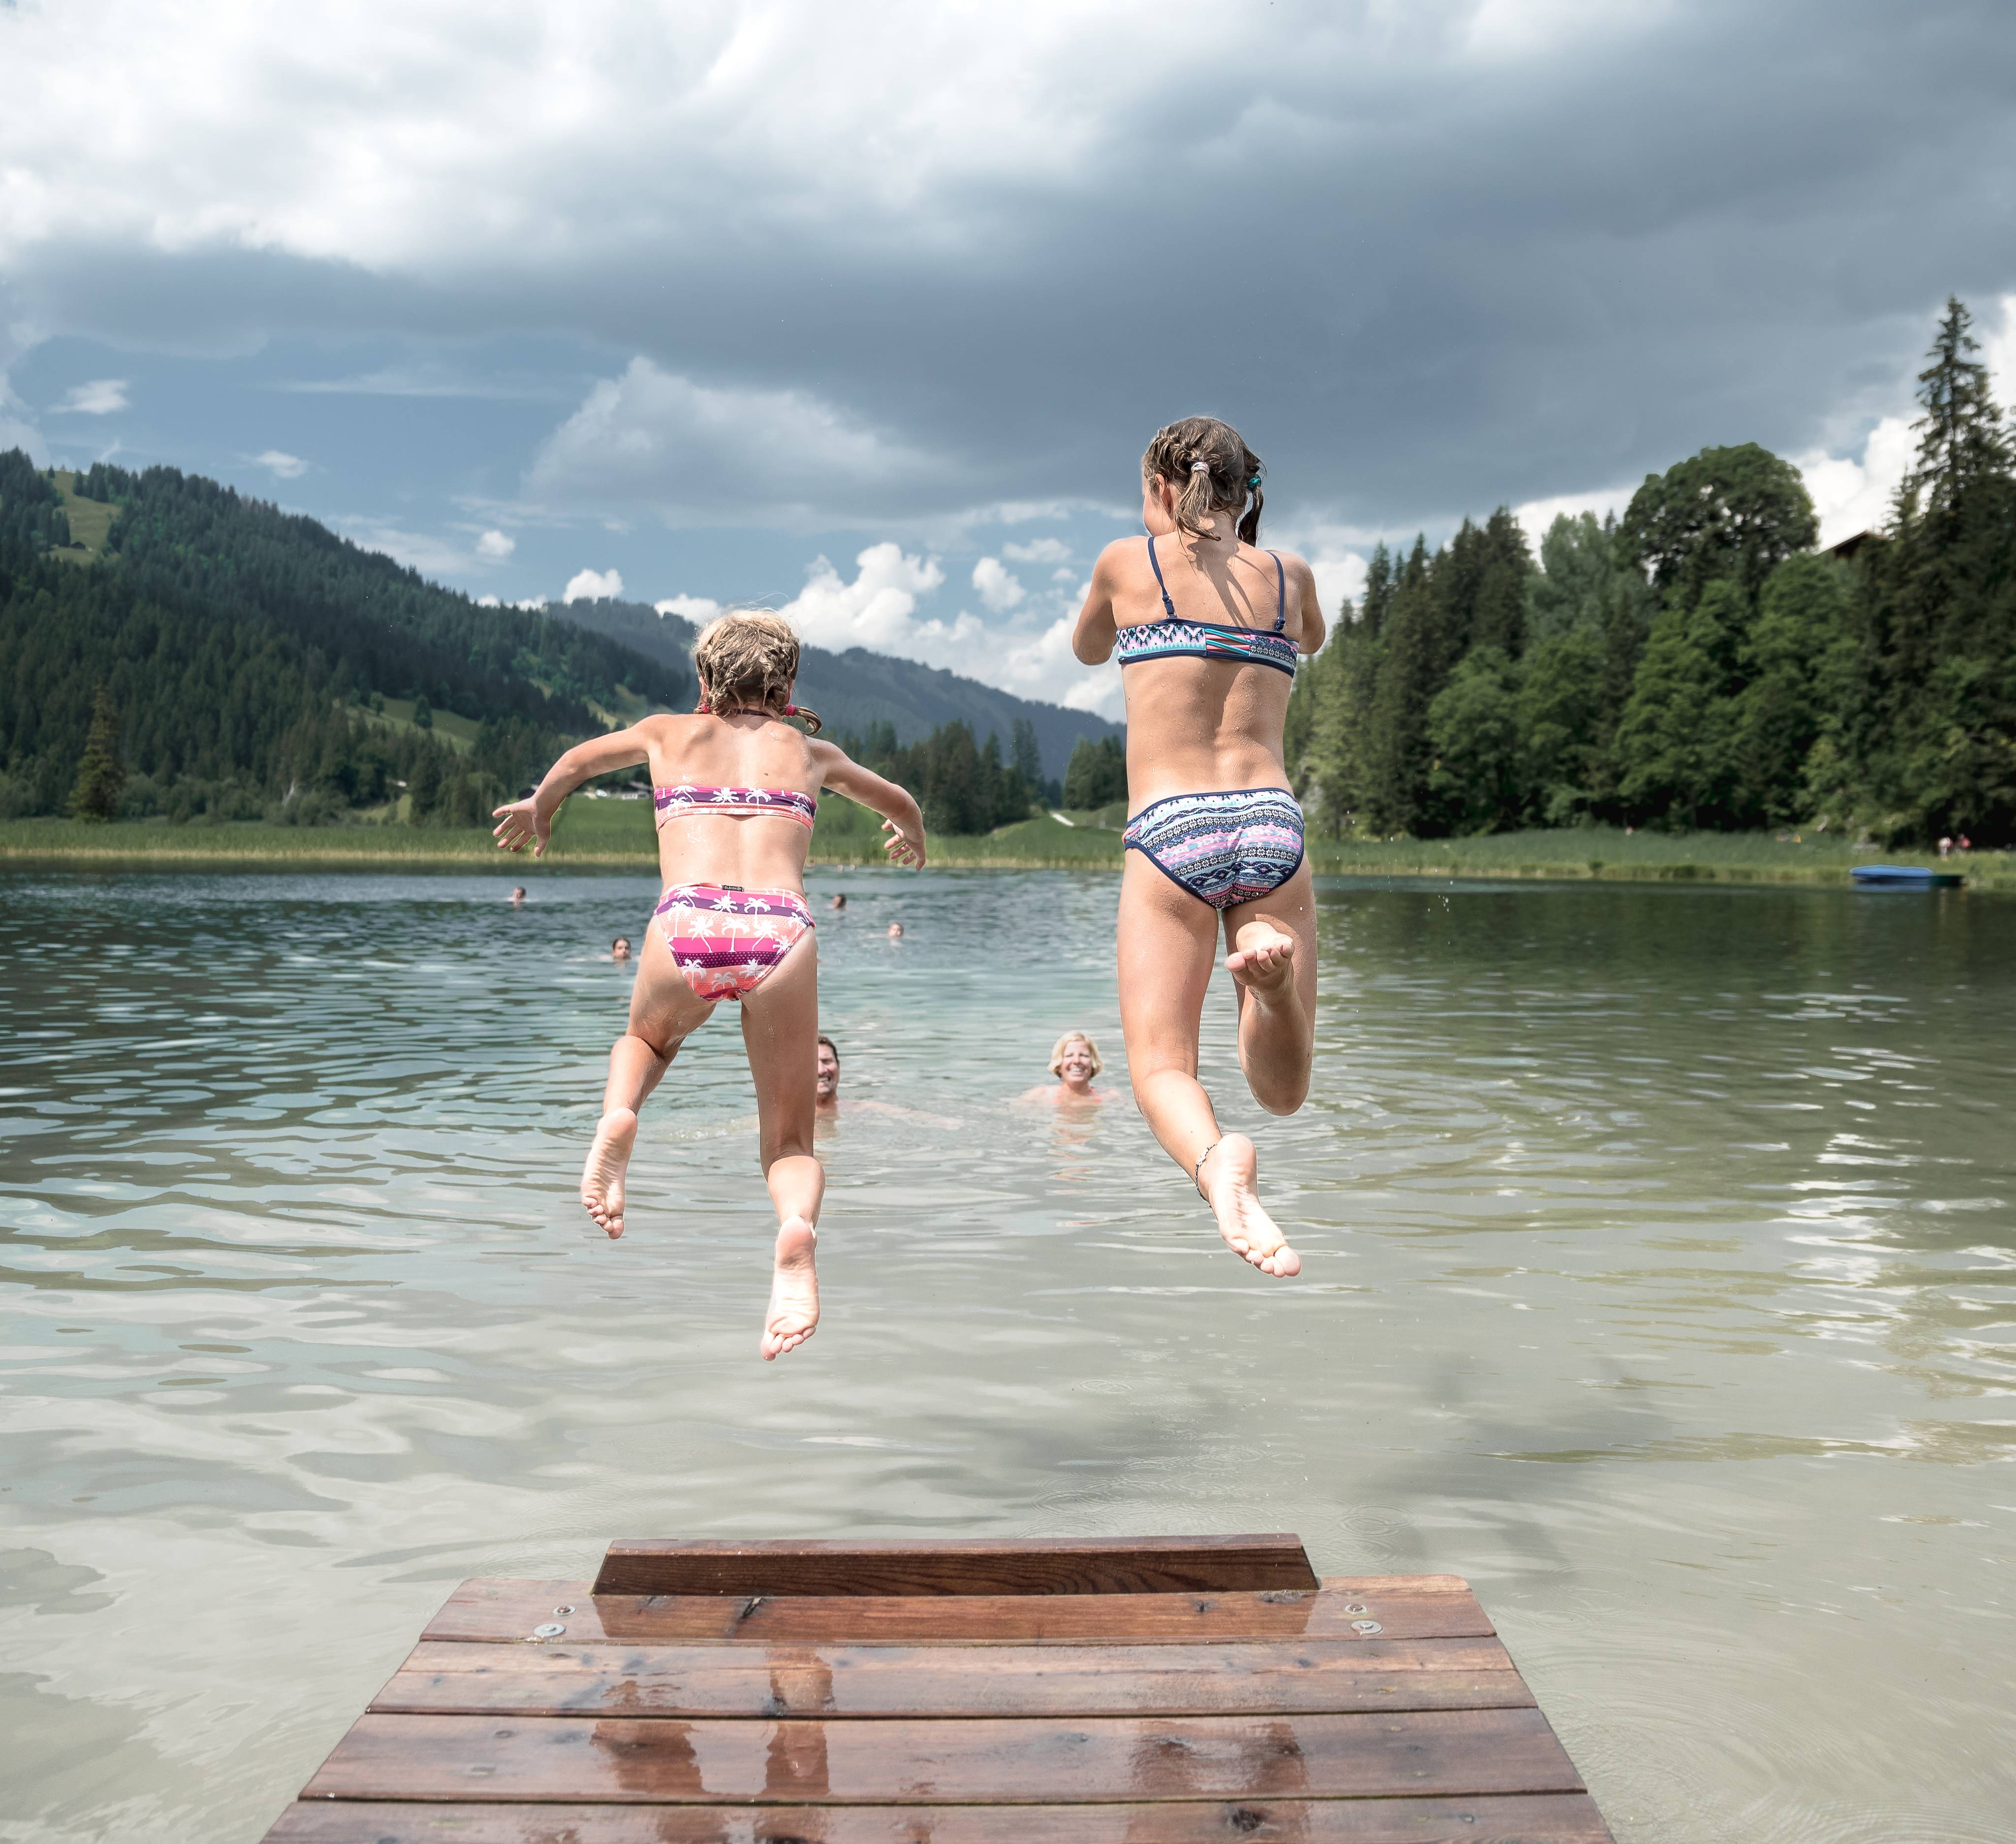 In the mountain lake or high in the sky?: Summer moments by the lake - Hotel Gstaaderhof